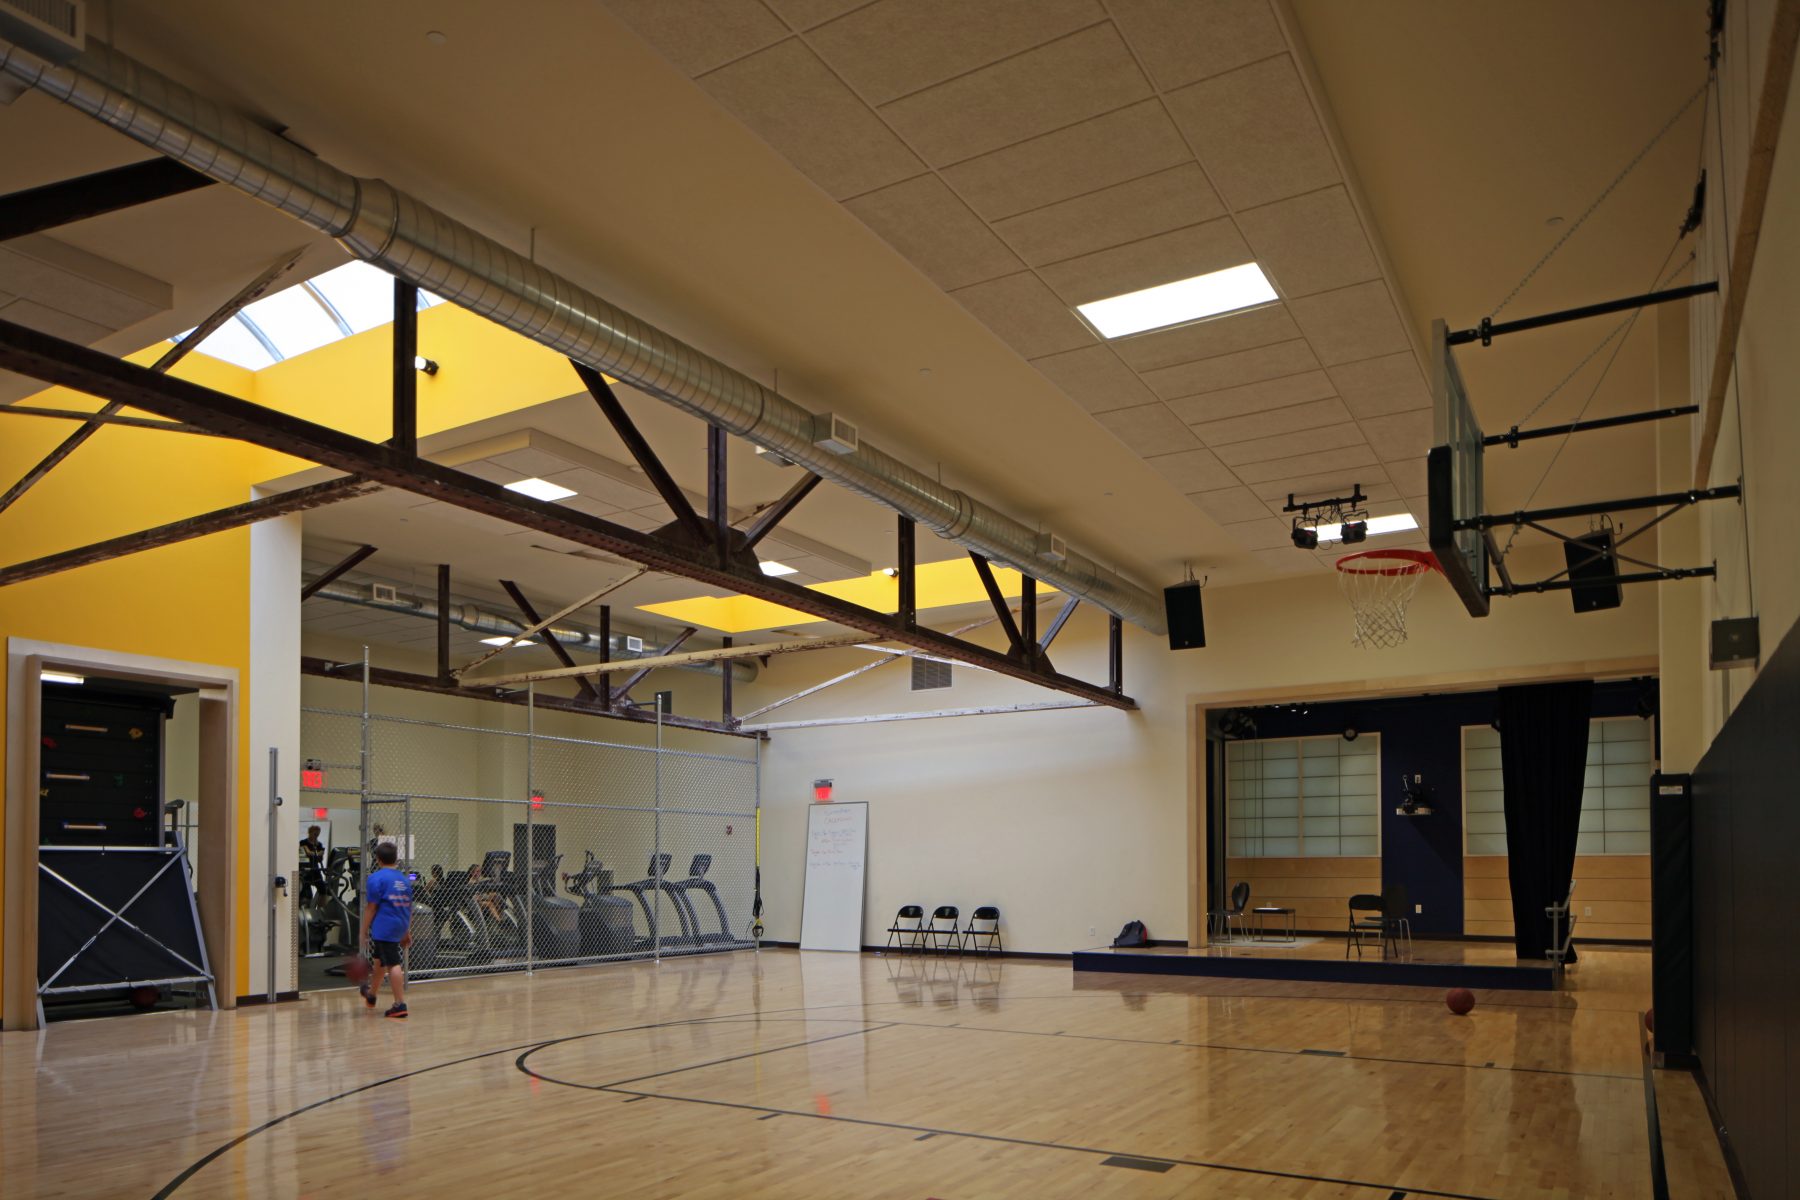 Brookline Teen Center Gym and exercise area